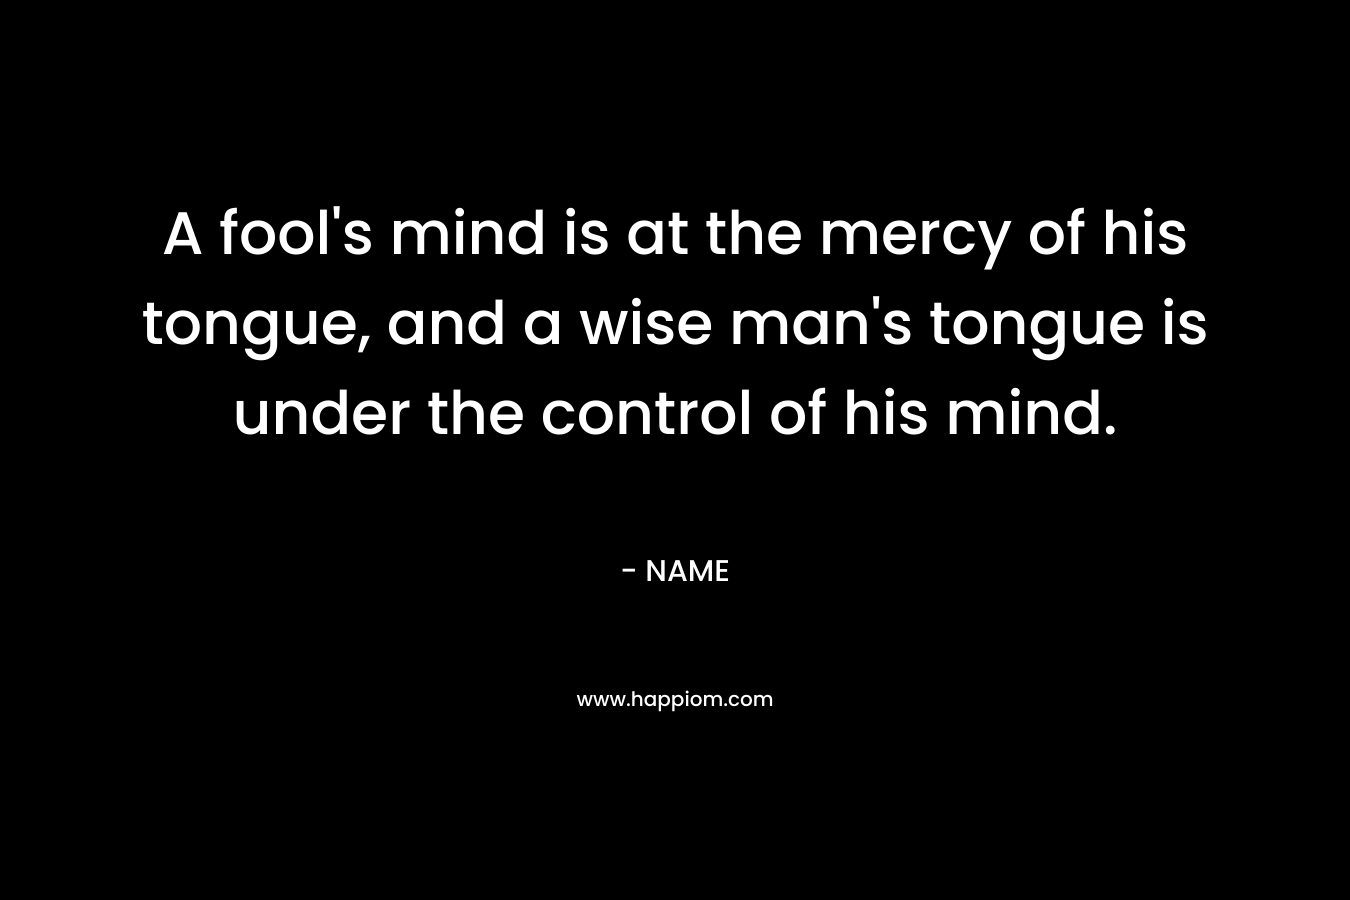 A fool's mind is at the mercy of his tongue, and a wise man's tongue is under the control of his mind.